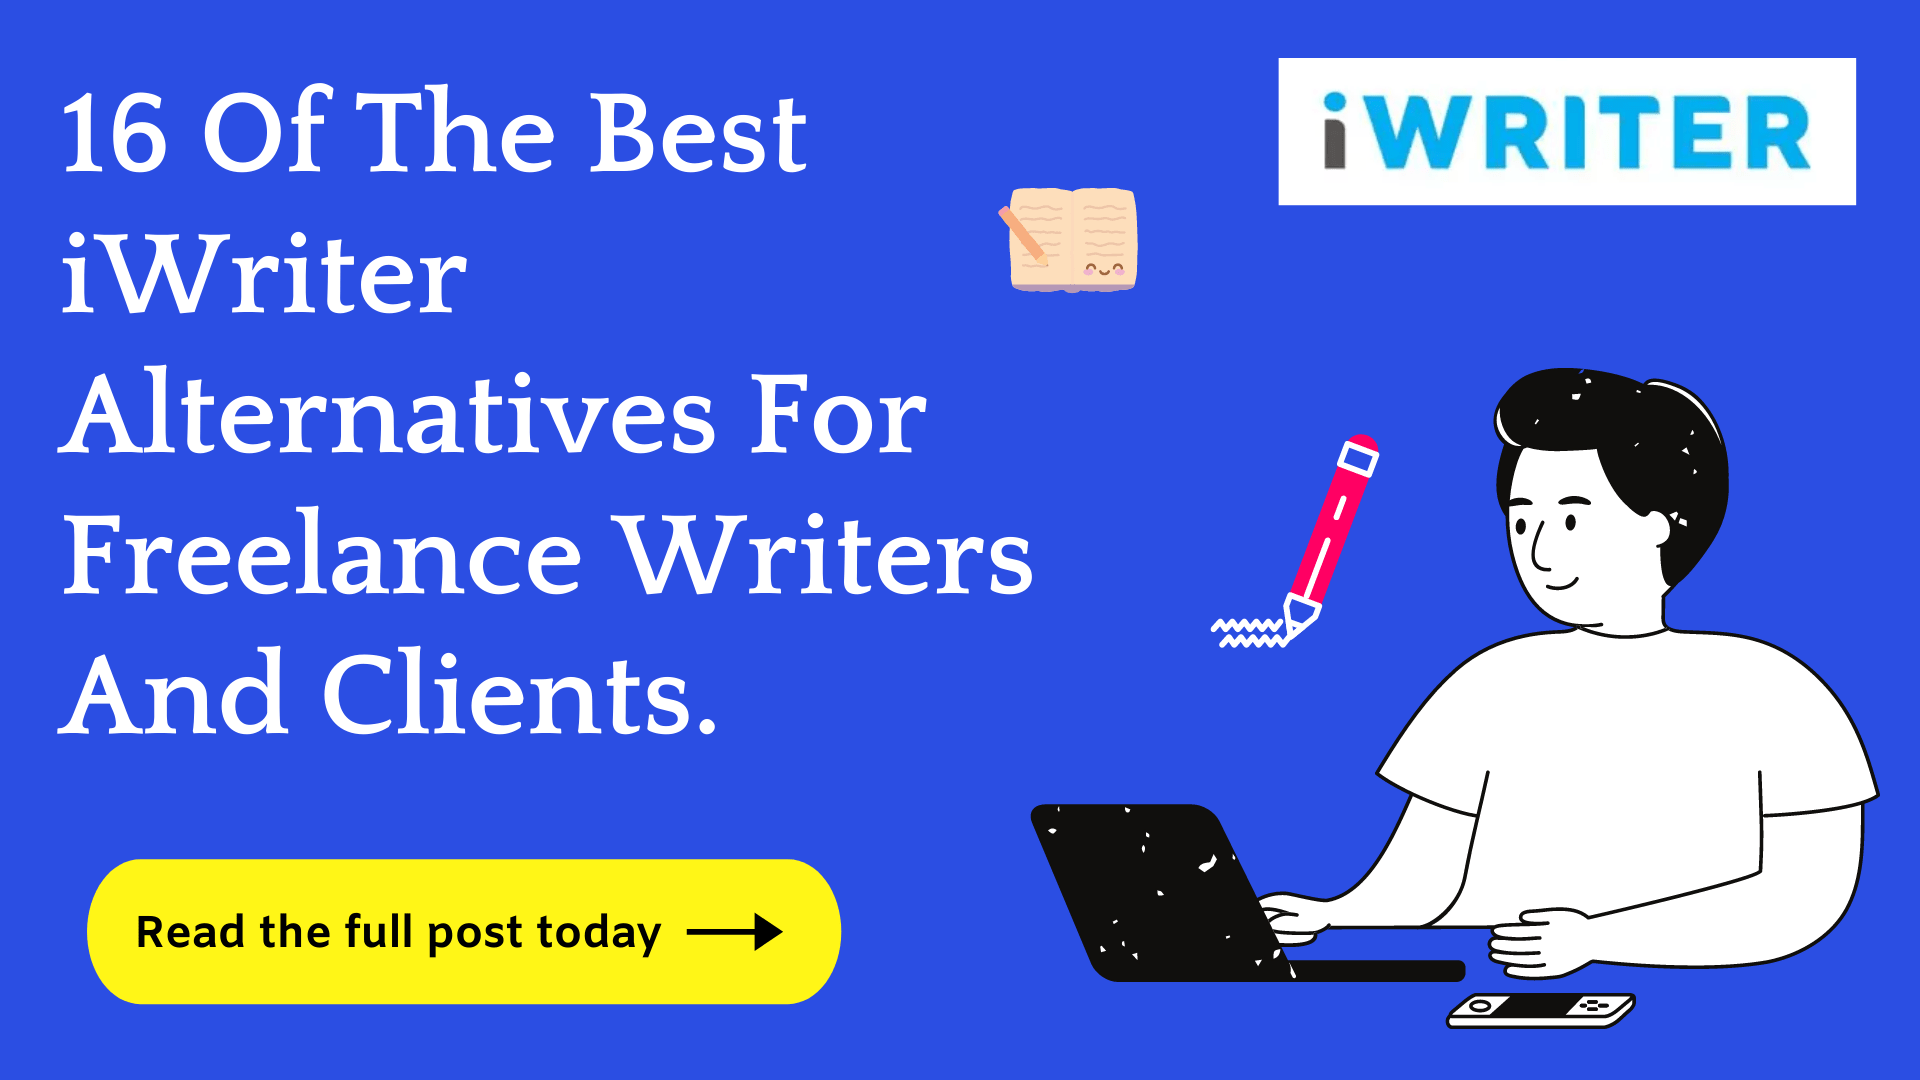 become a writer on iwriter